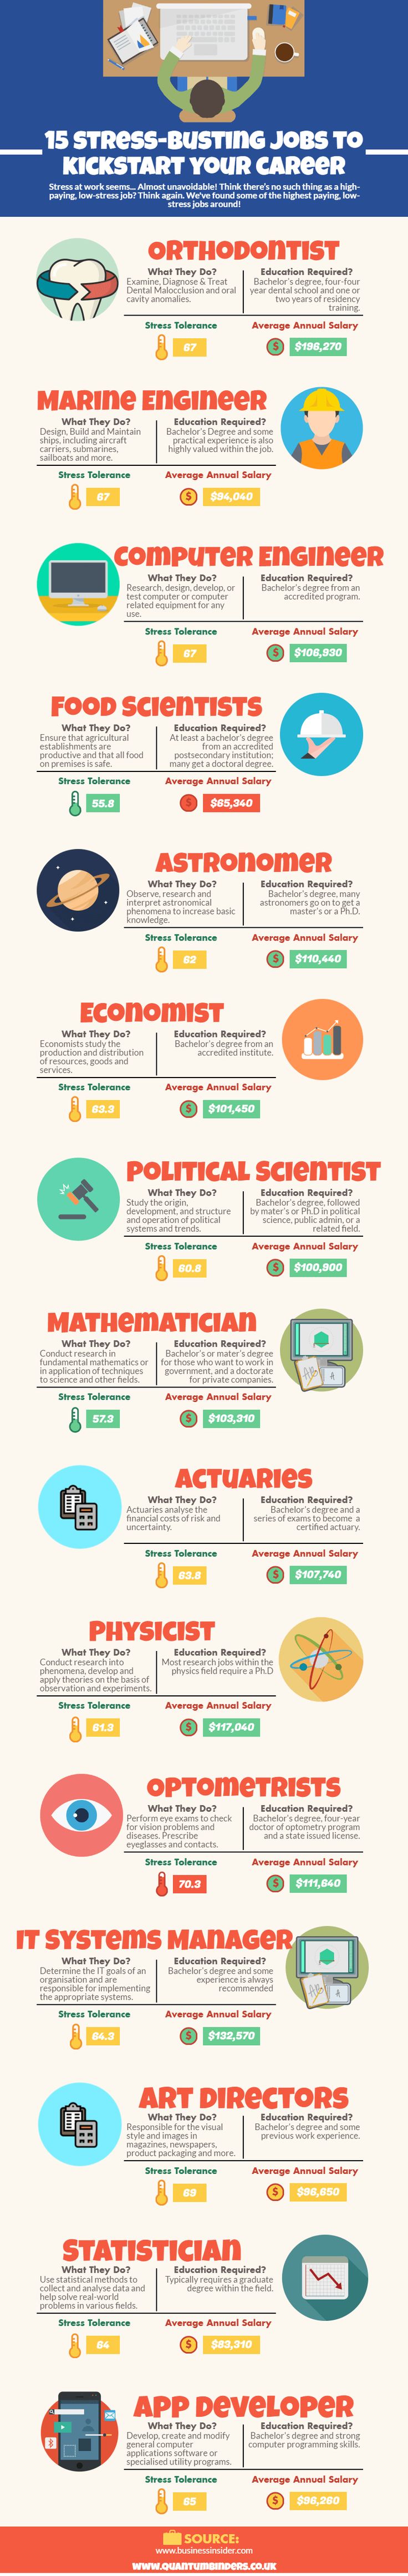 Psychology-Infographic-15-Stress-Busting-Jobs-to-Kickstart-Your-Career-stressless-Job-via-JobCluster Psychology Infographic : 15 Low-Stress Jobs that Rank High on the Pay Scale